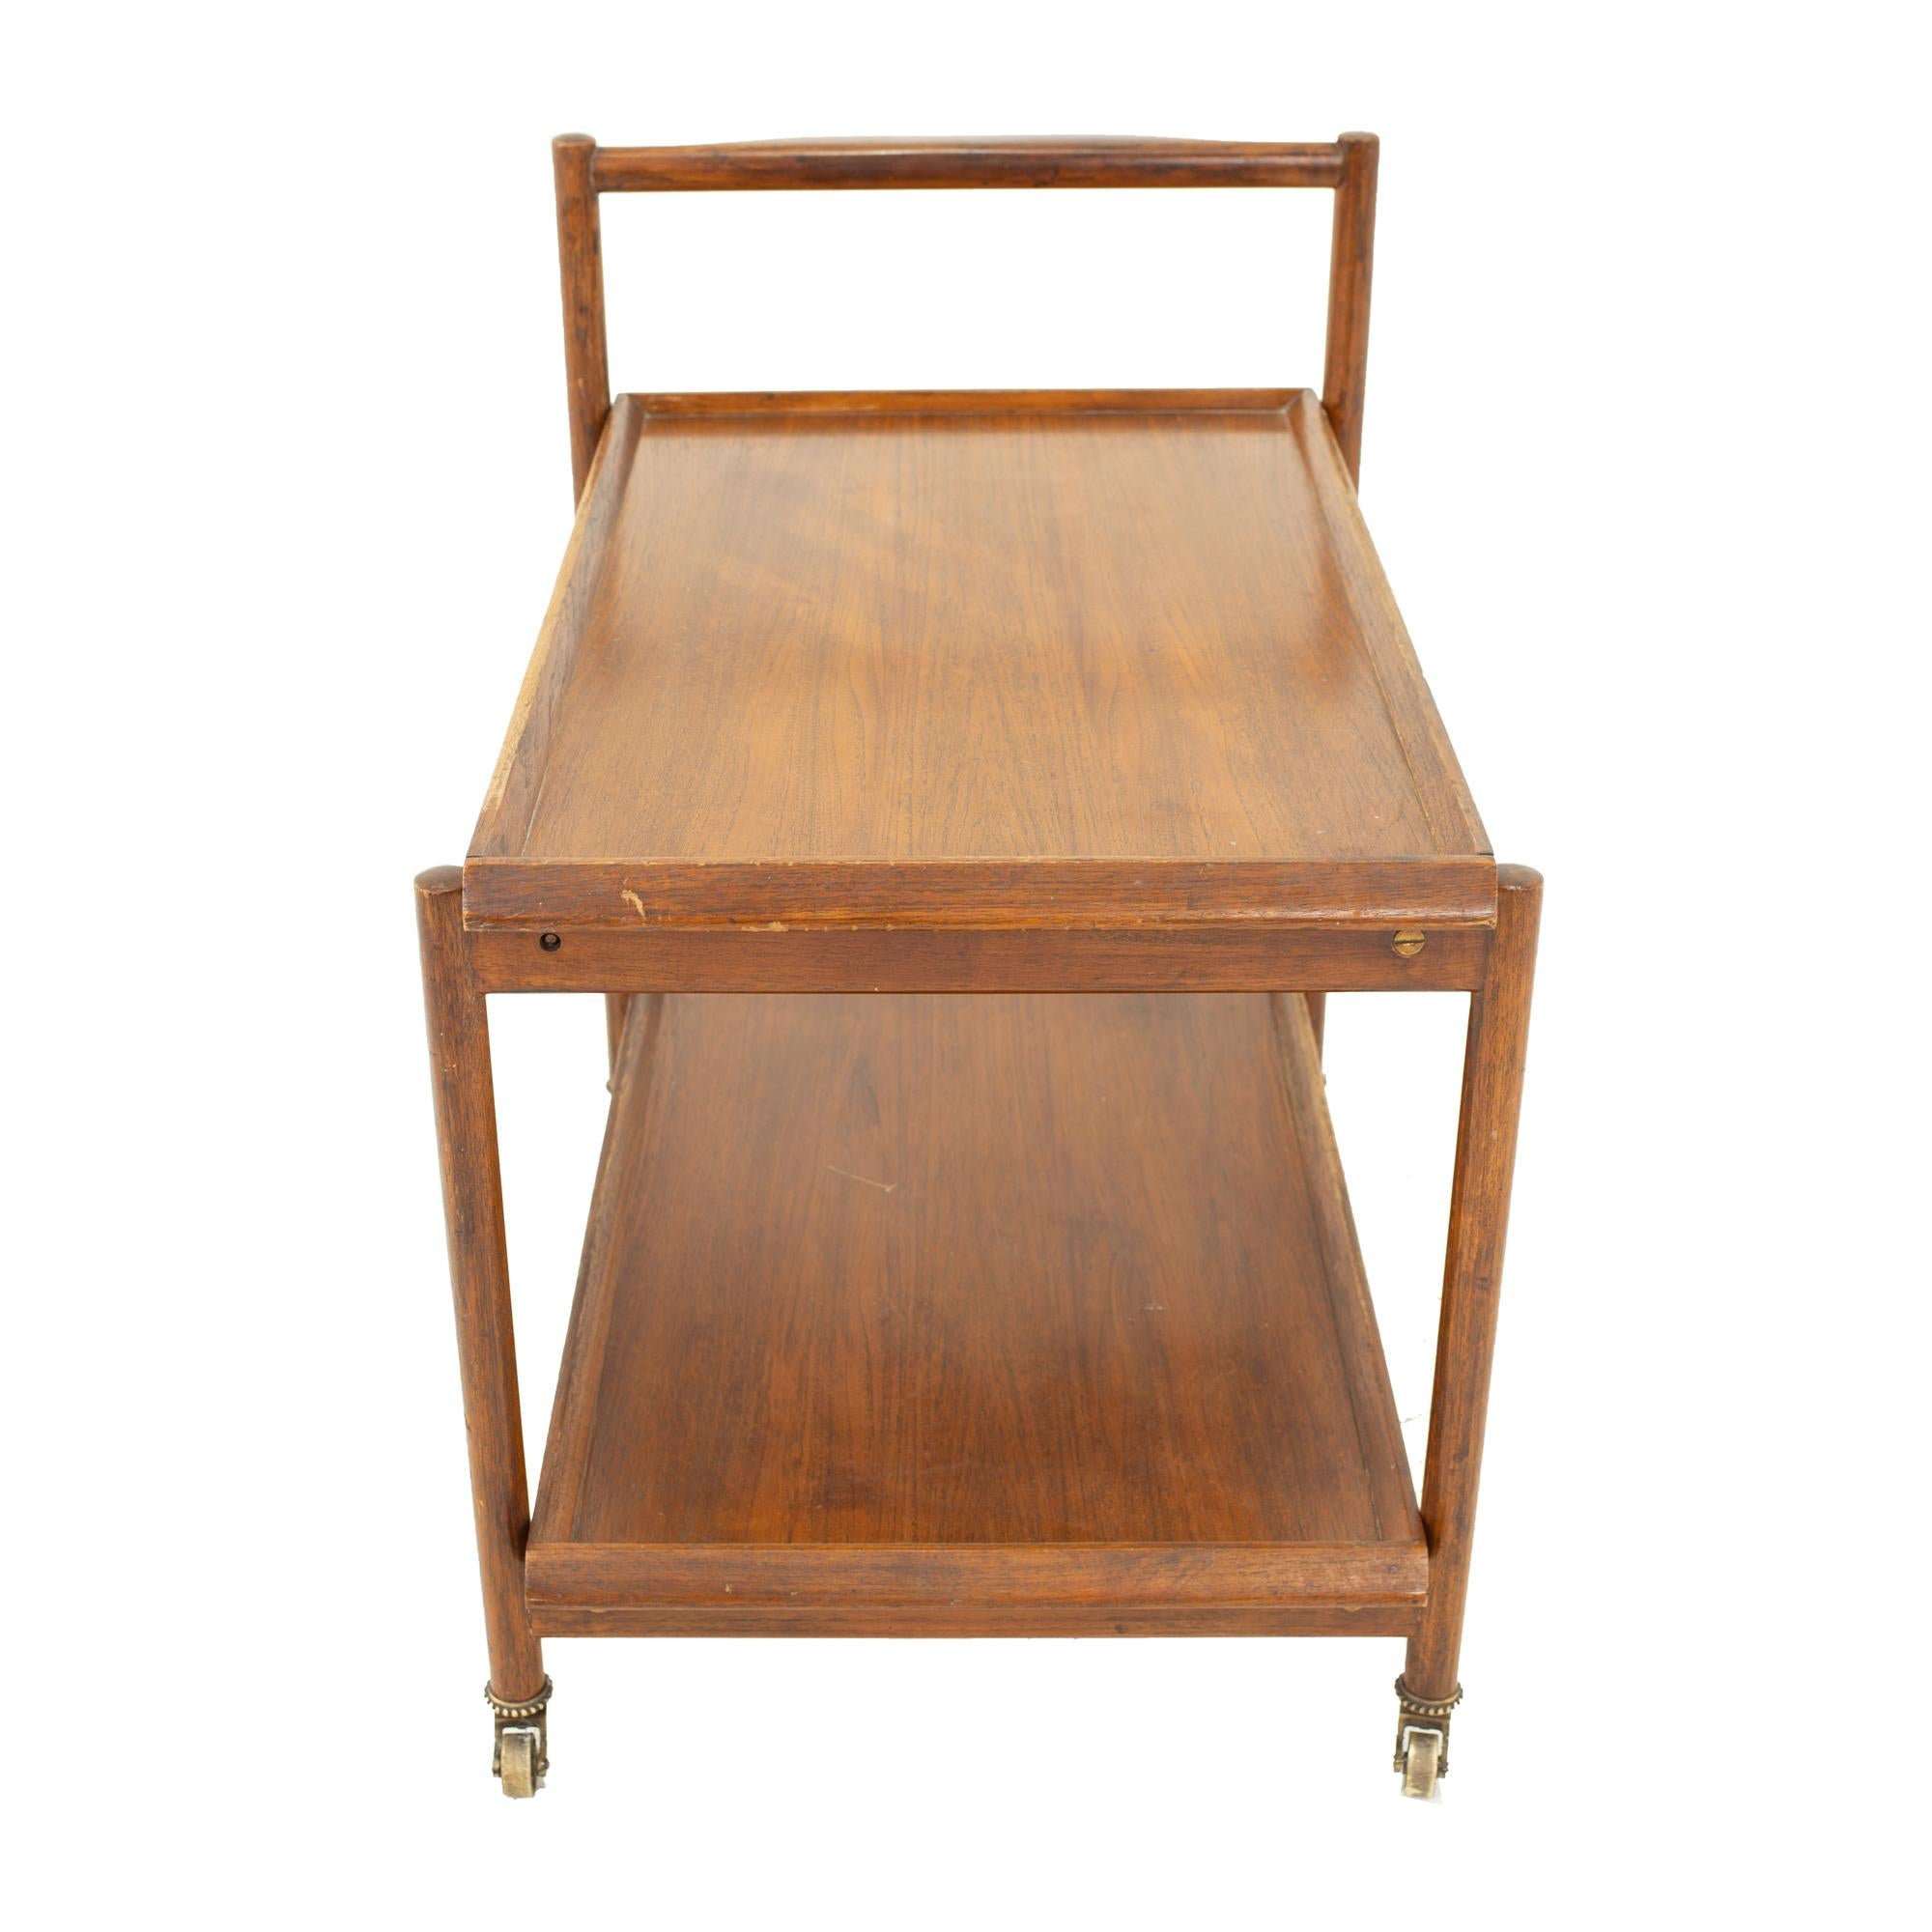 Mid Century teak 2-tier bar cart
Bar cart measures: 21 wide x 30 deep x 29.5 high

All pieces of furniture can be had in what we call restored vintage condition. This means the piece is restored upon purchase so it’s free of watermarks, chips or